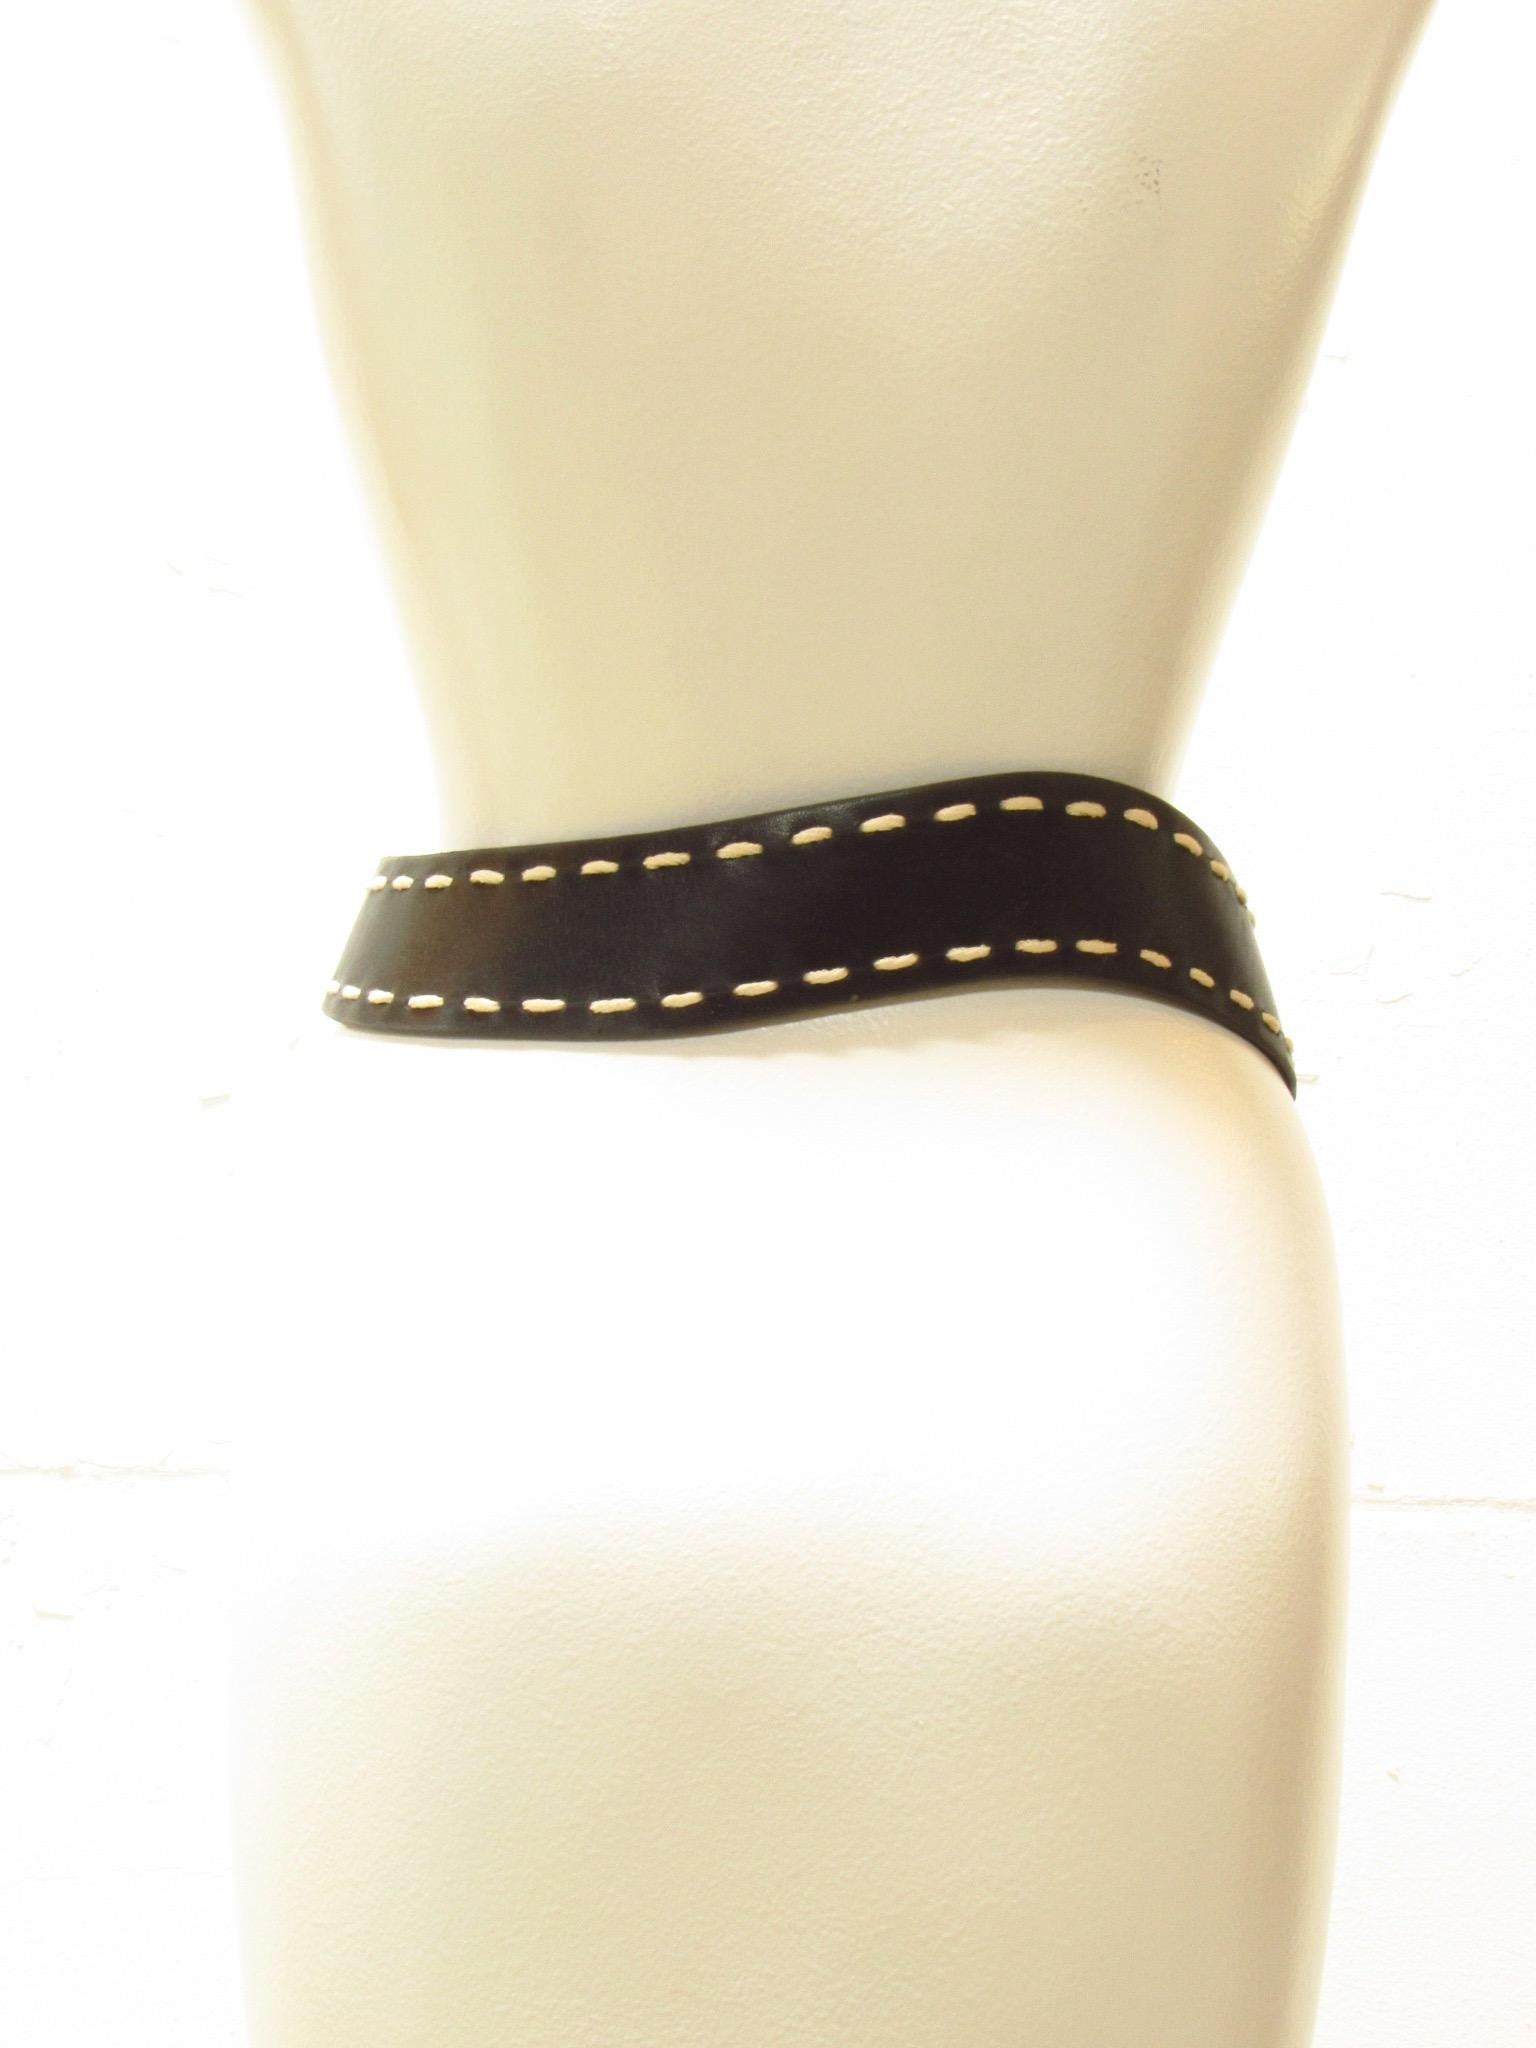 Chantal Thomass Belt In New Condition For Sale In Laguna Beach, CA